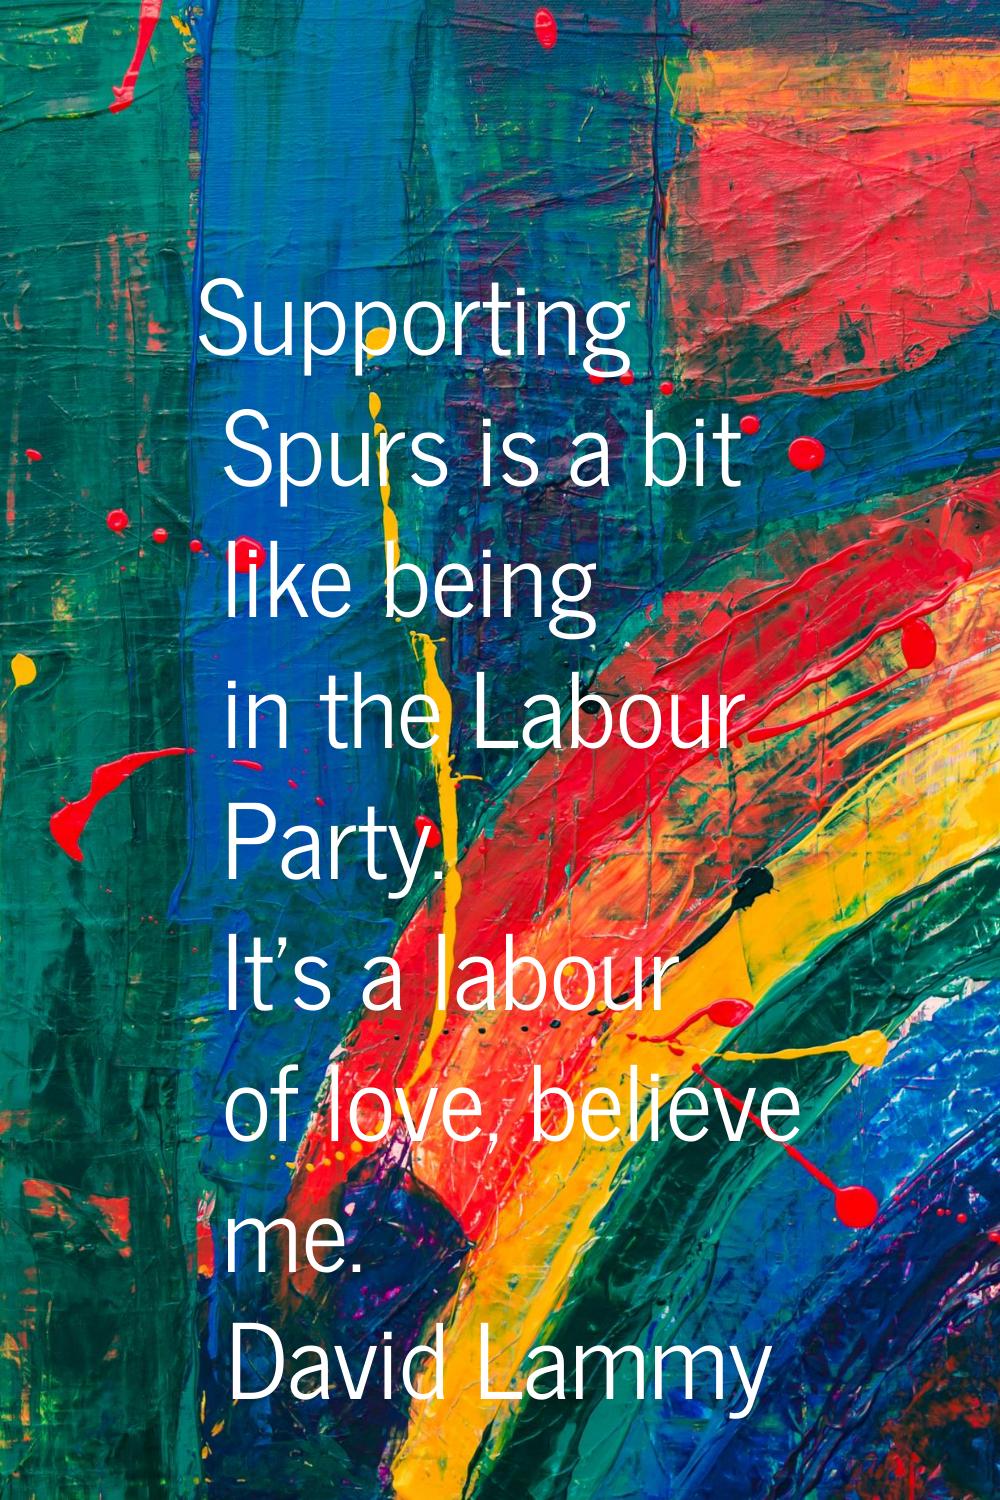 Supporting Spurs is a bit like being in the Labour Party. It's a labour of love, believe me.